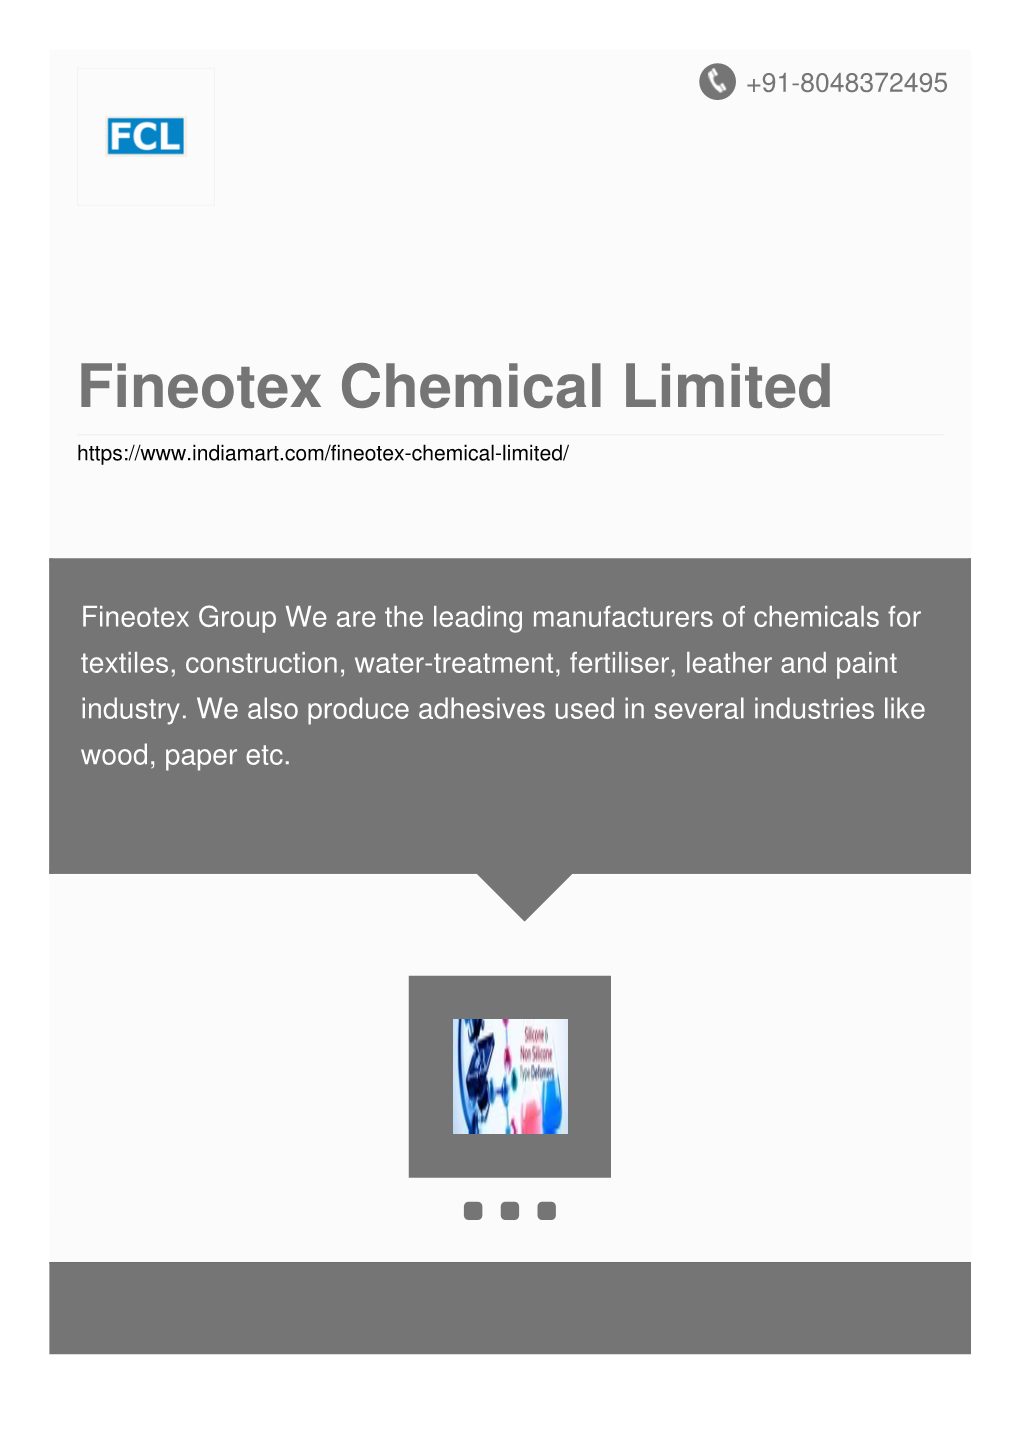 Fineotex Chemical Limited